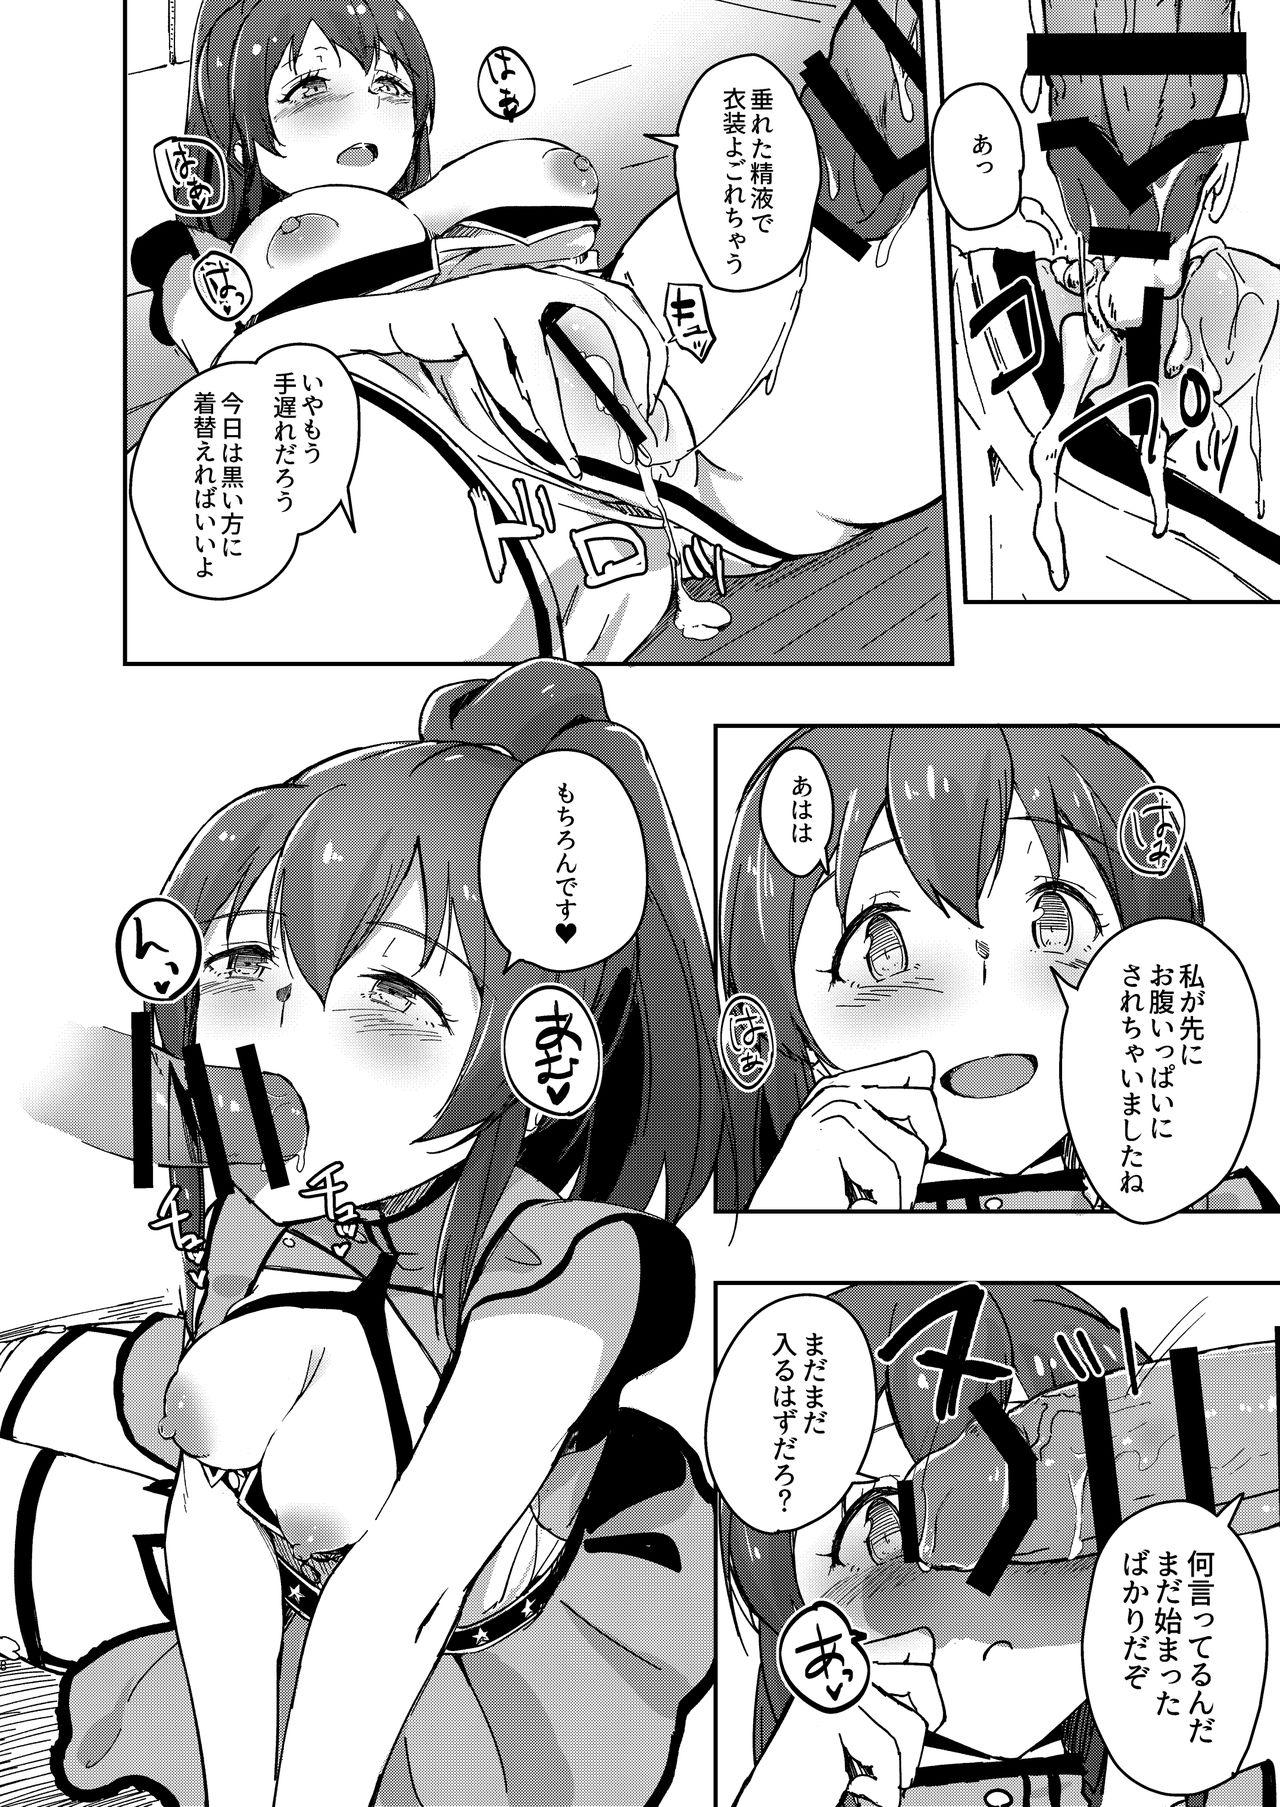 Masseuse TOP! CLOVER BOOK + omake - The idolmaster Stepdaughter - Page 7